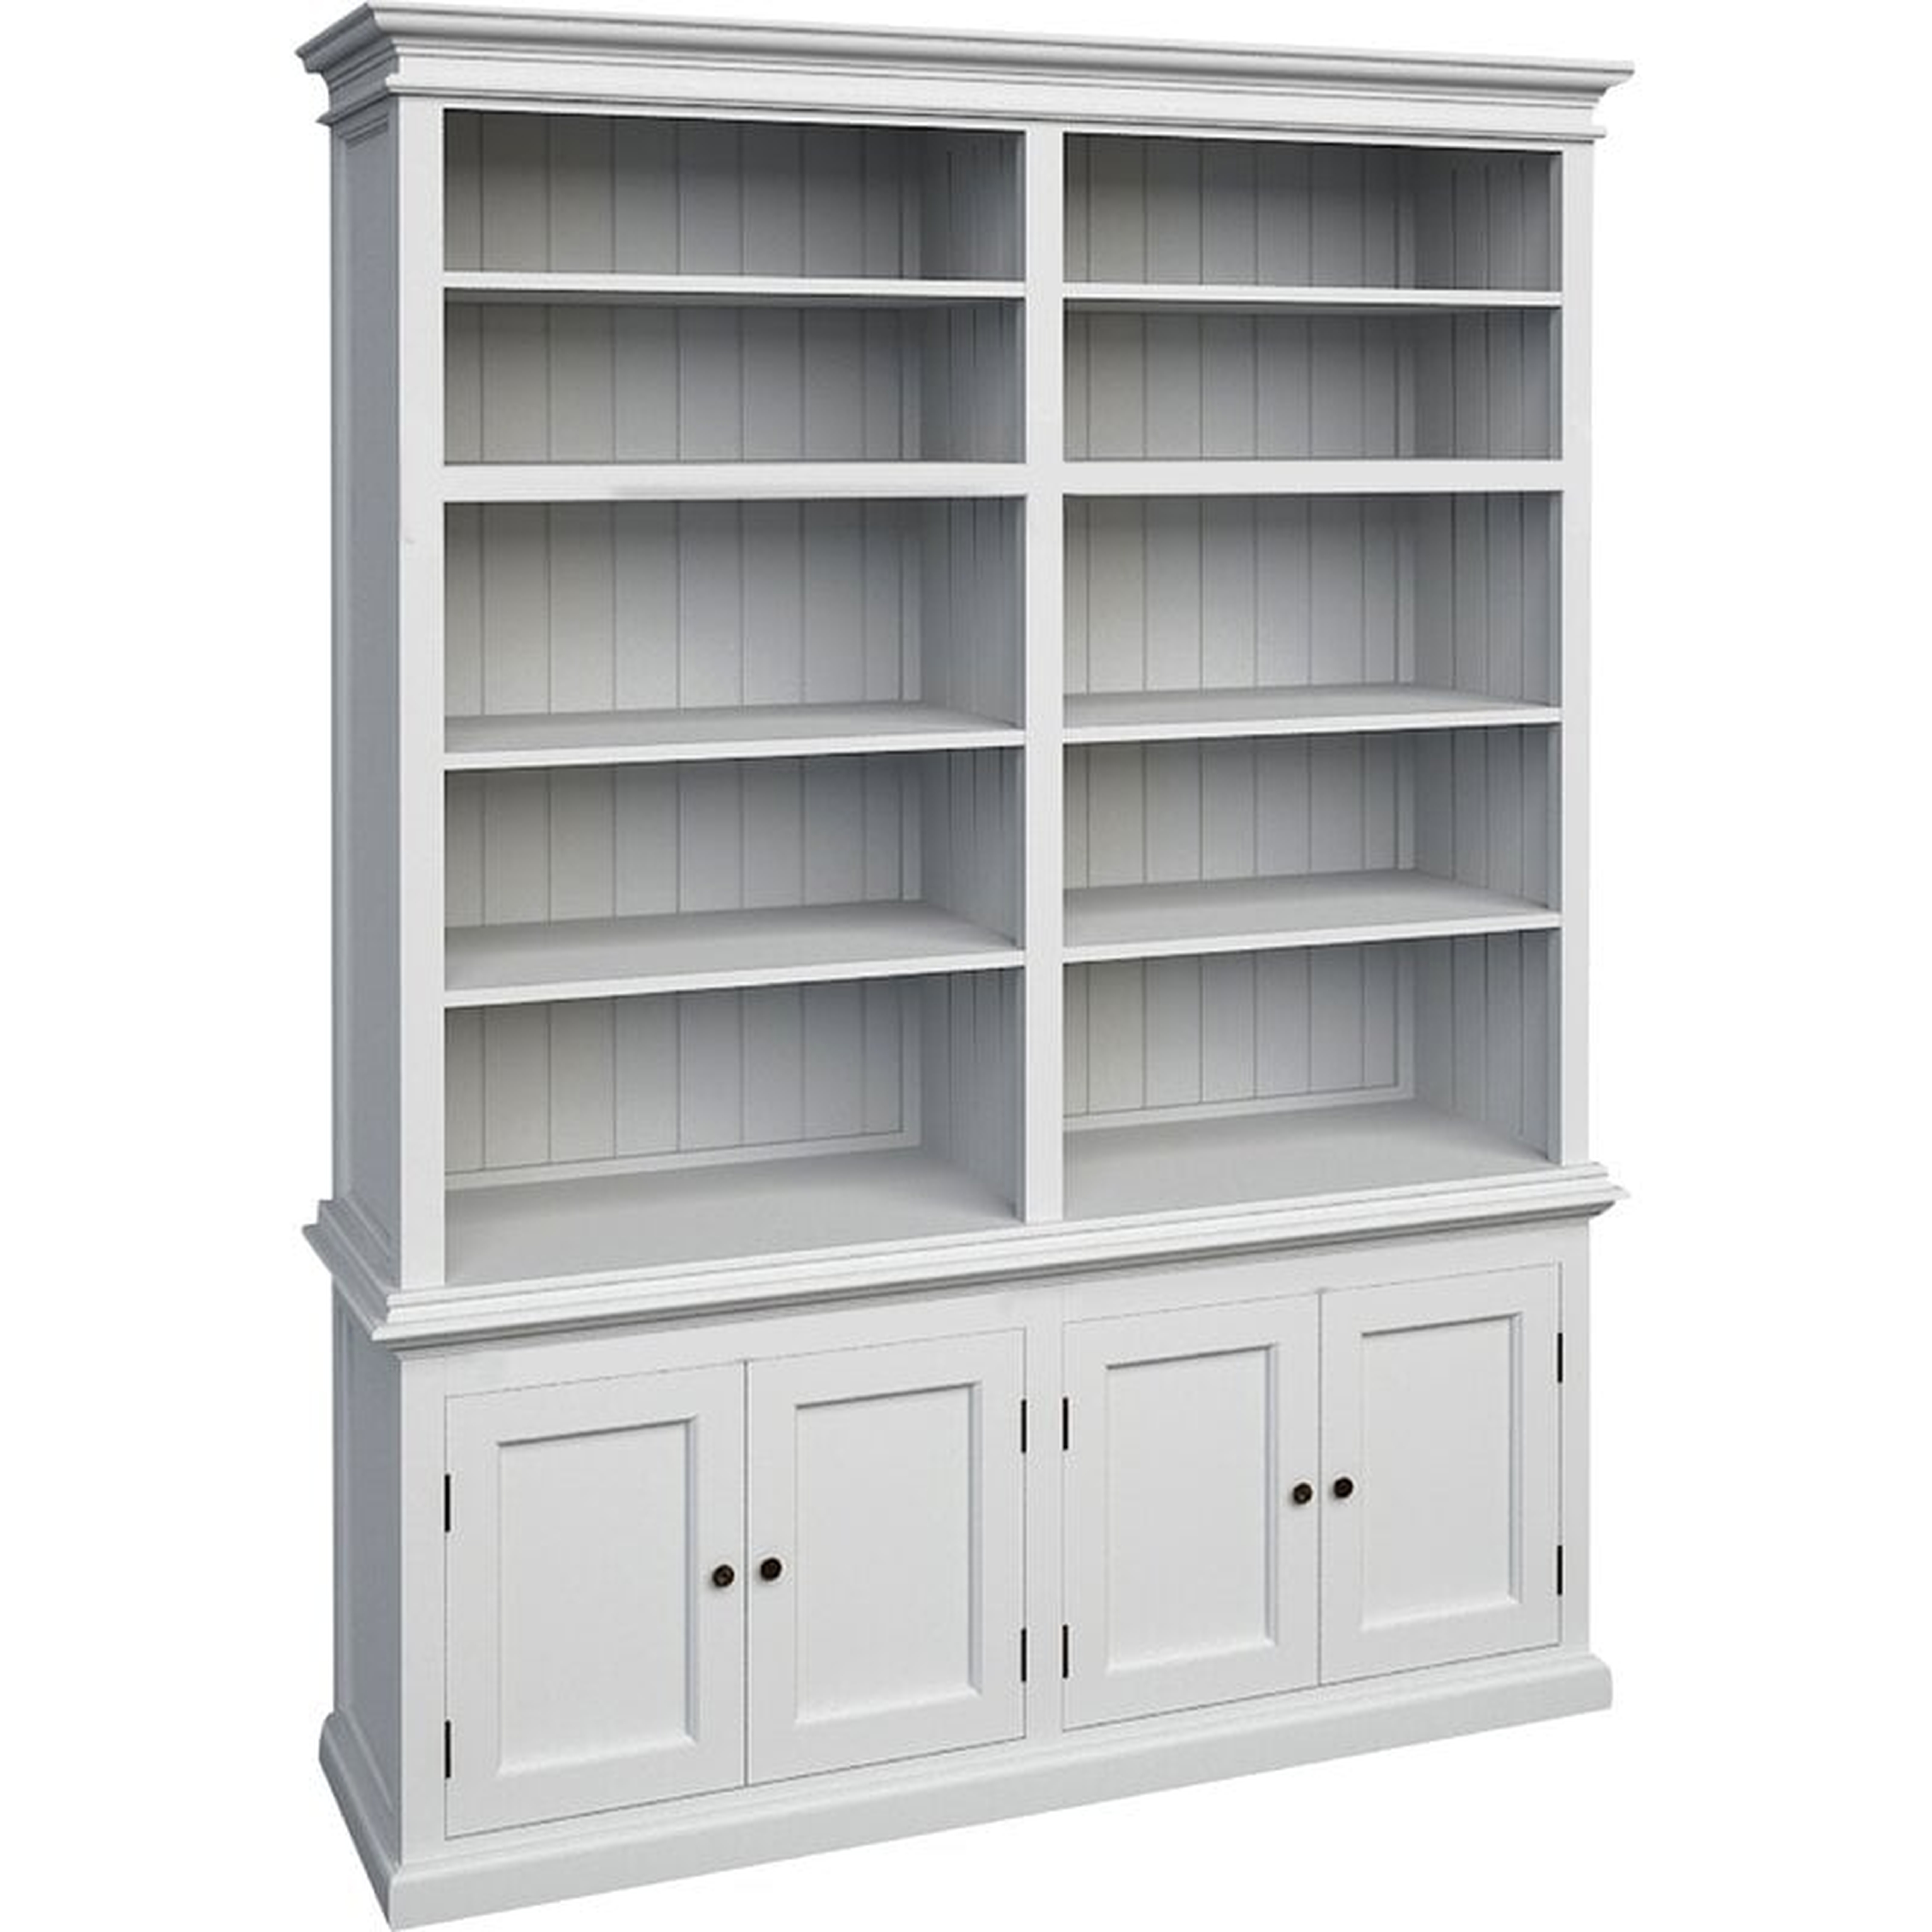 Jakel 86.61'' H x 65'' W Solid Wood Library Bookcase, White - Wayfair